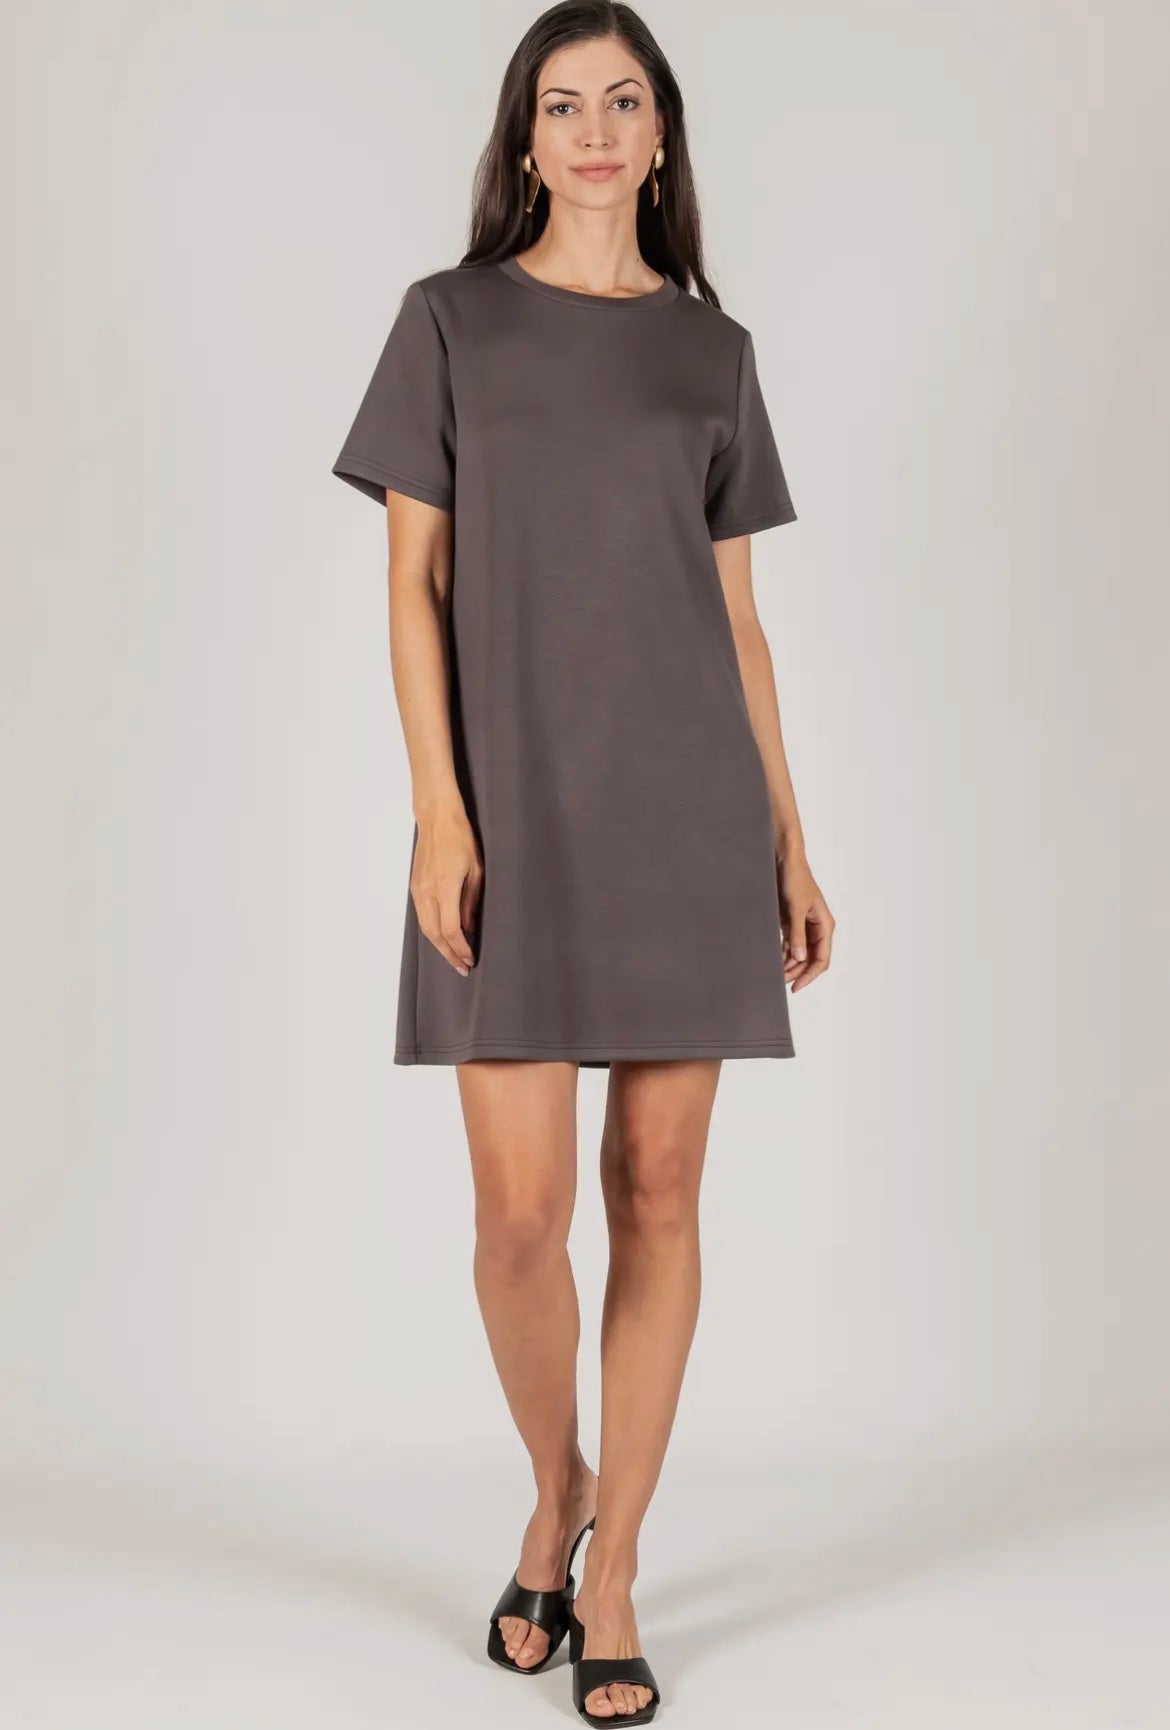 T shirt Dress in Charcoal